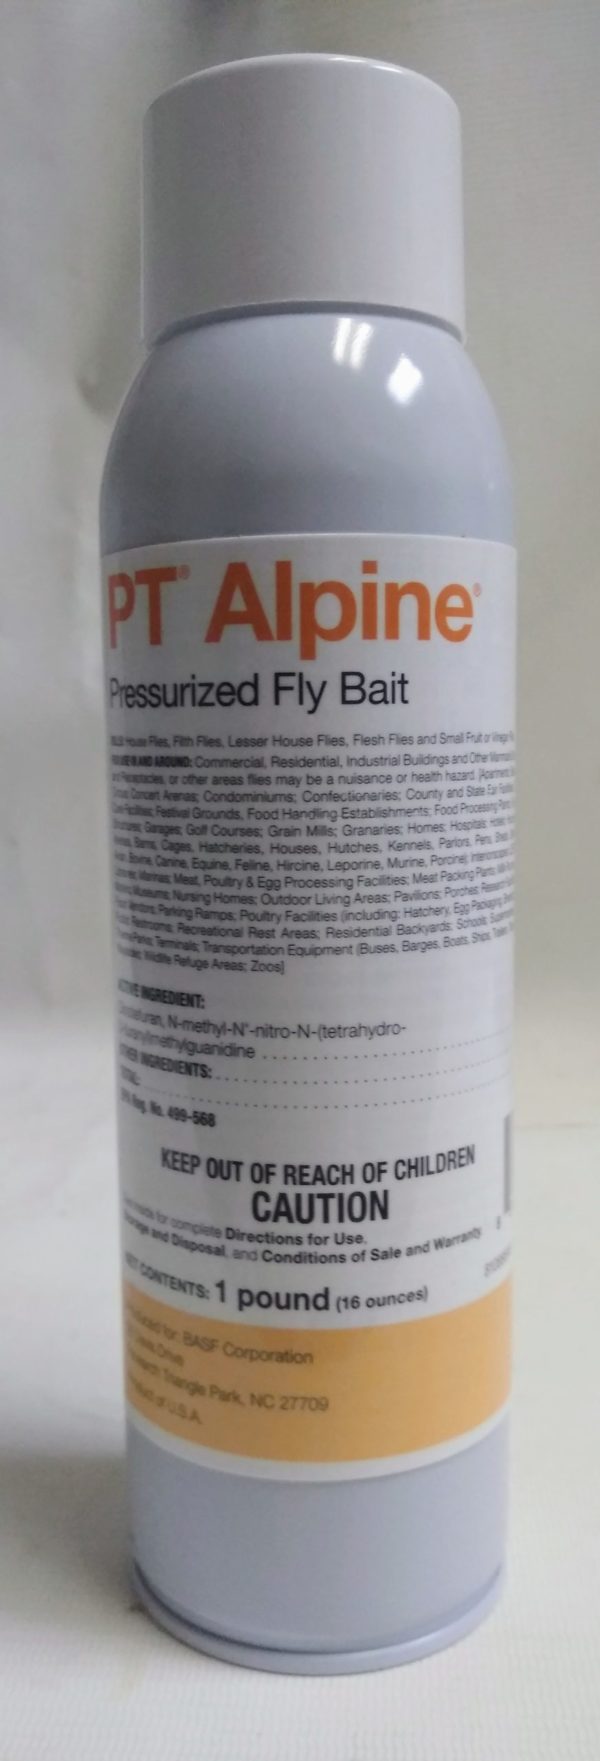 PT Alpine Fly Bait 16 oz: Fast-Acting Fly Control